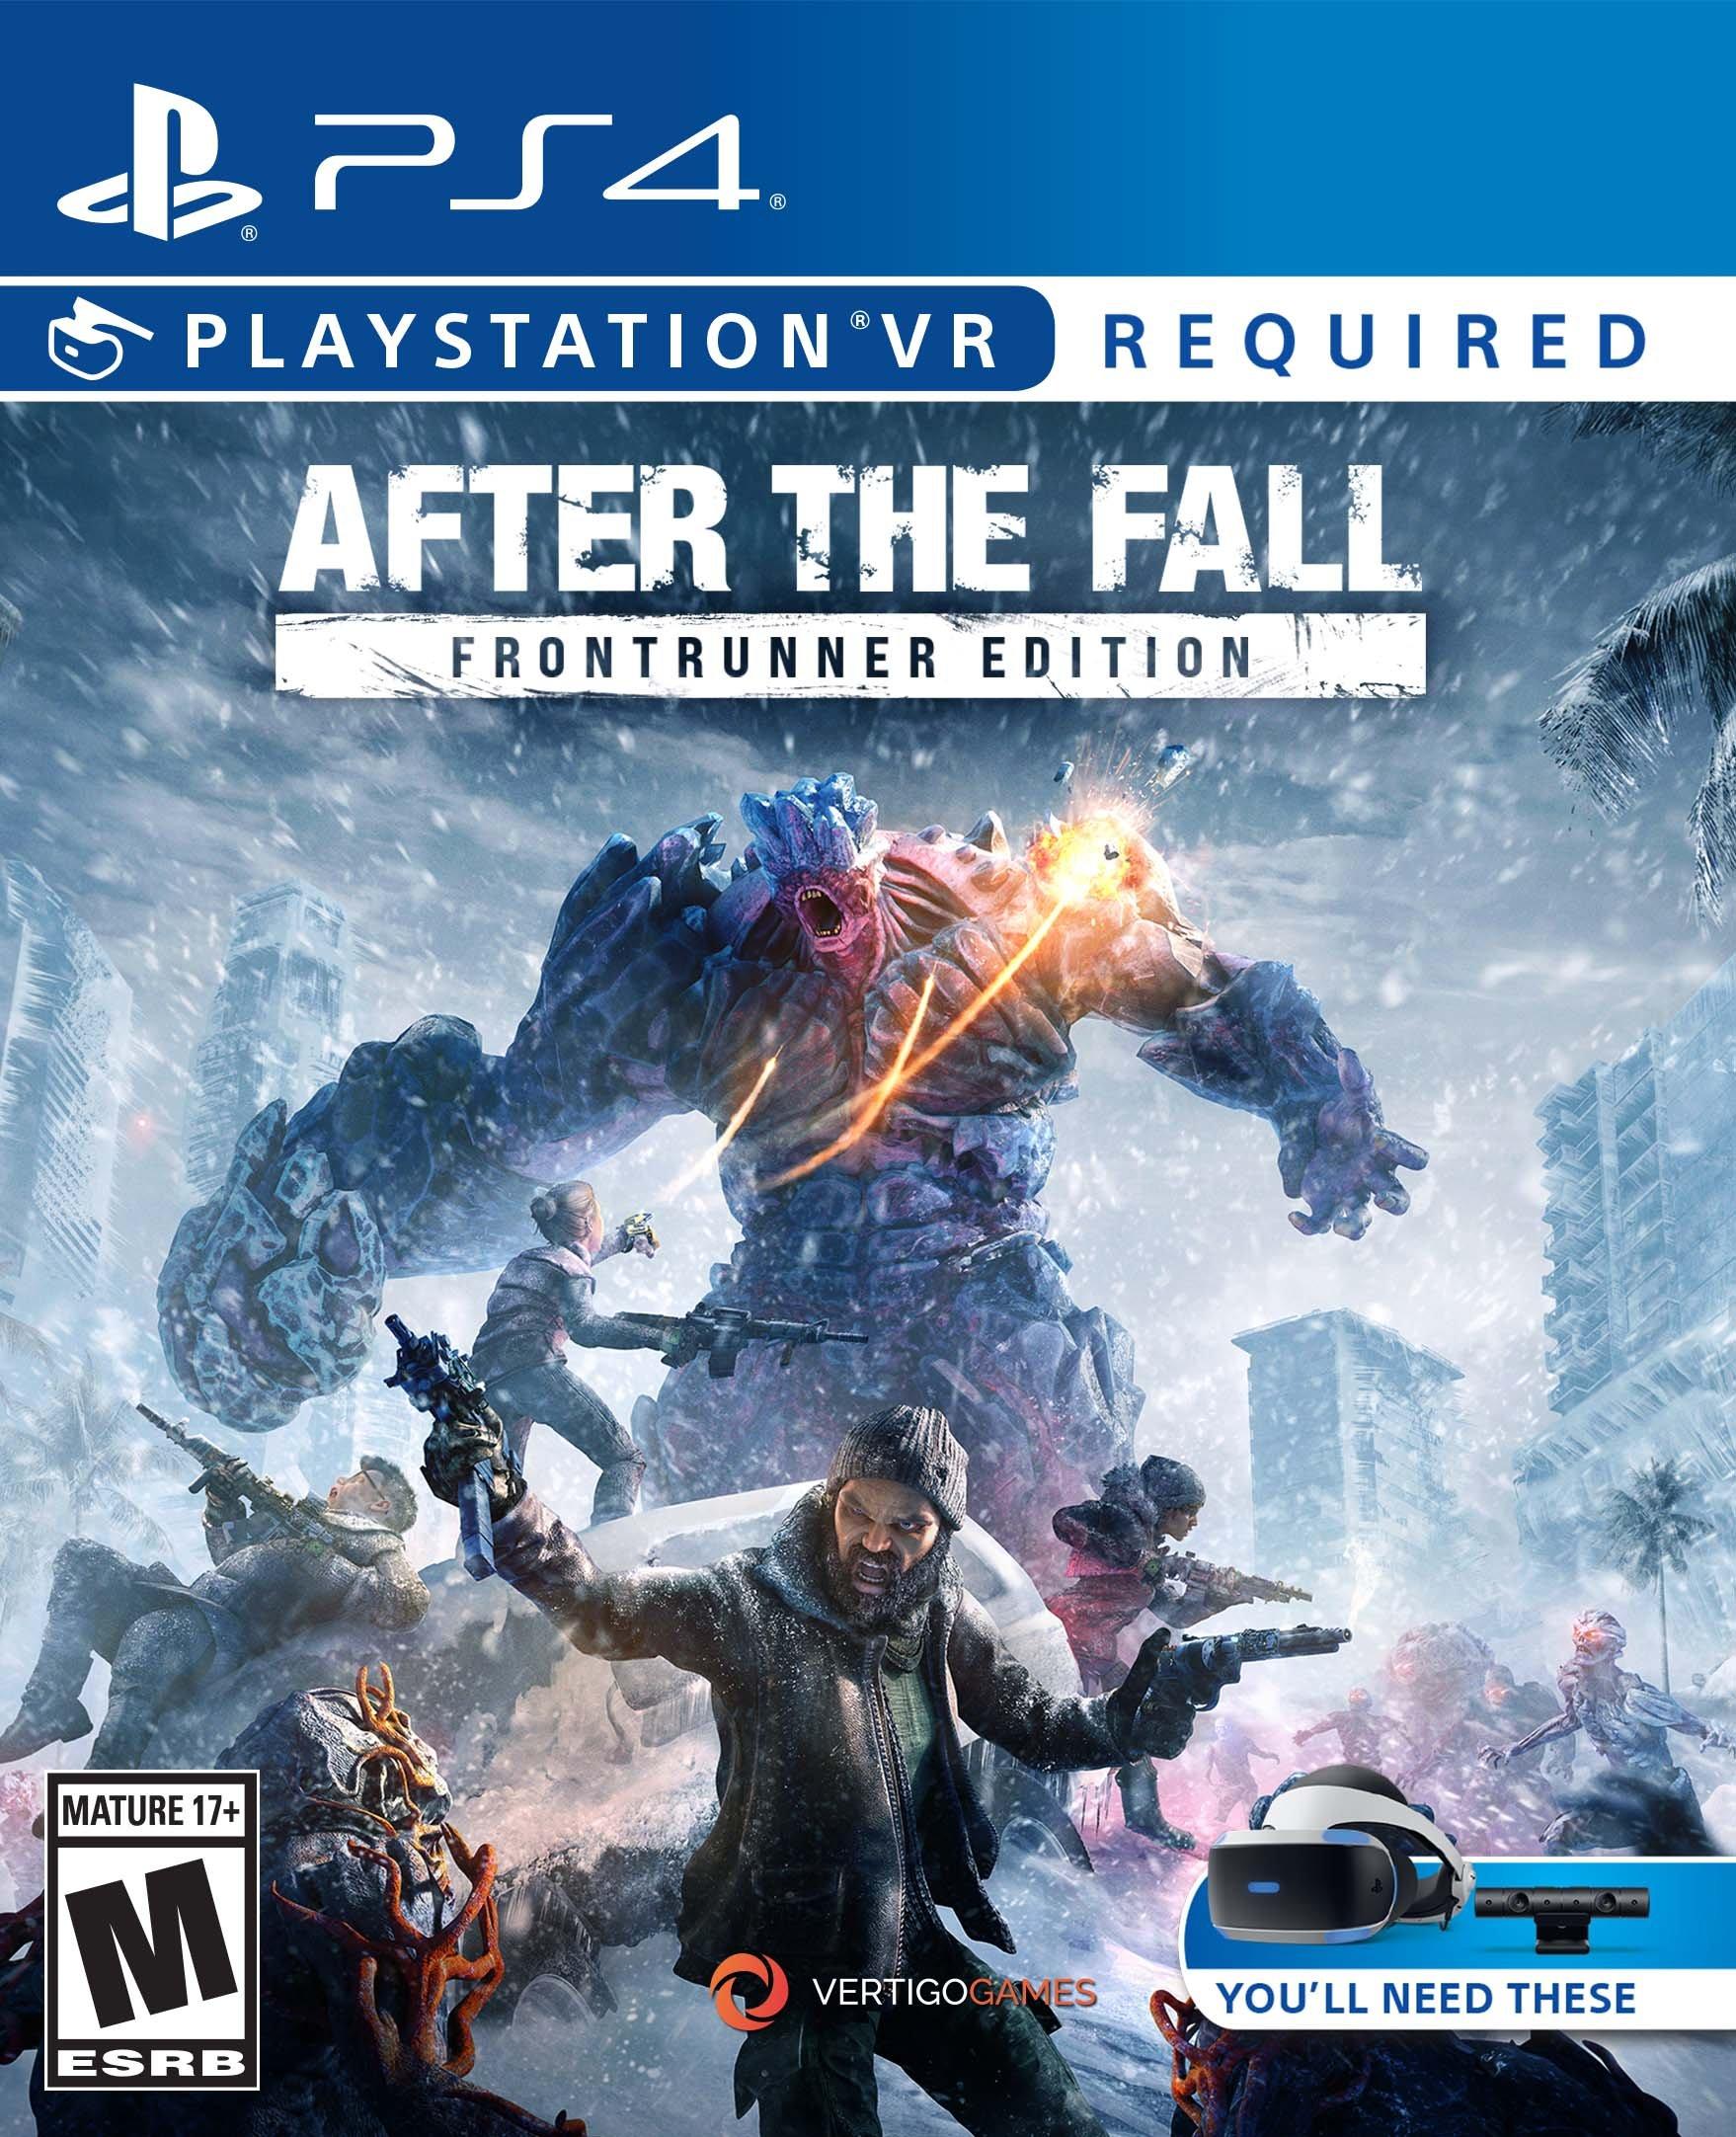 After the Fall: Frontrunner Edition Virtual Reality - PlayStation 4